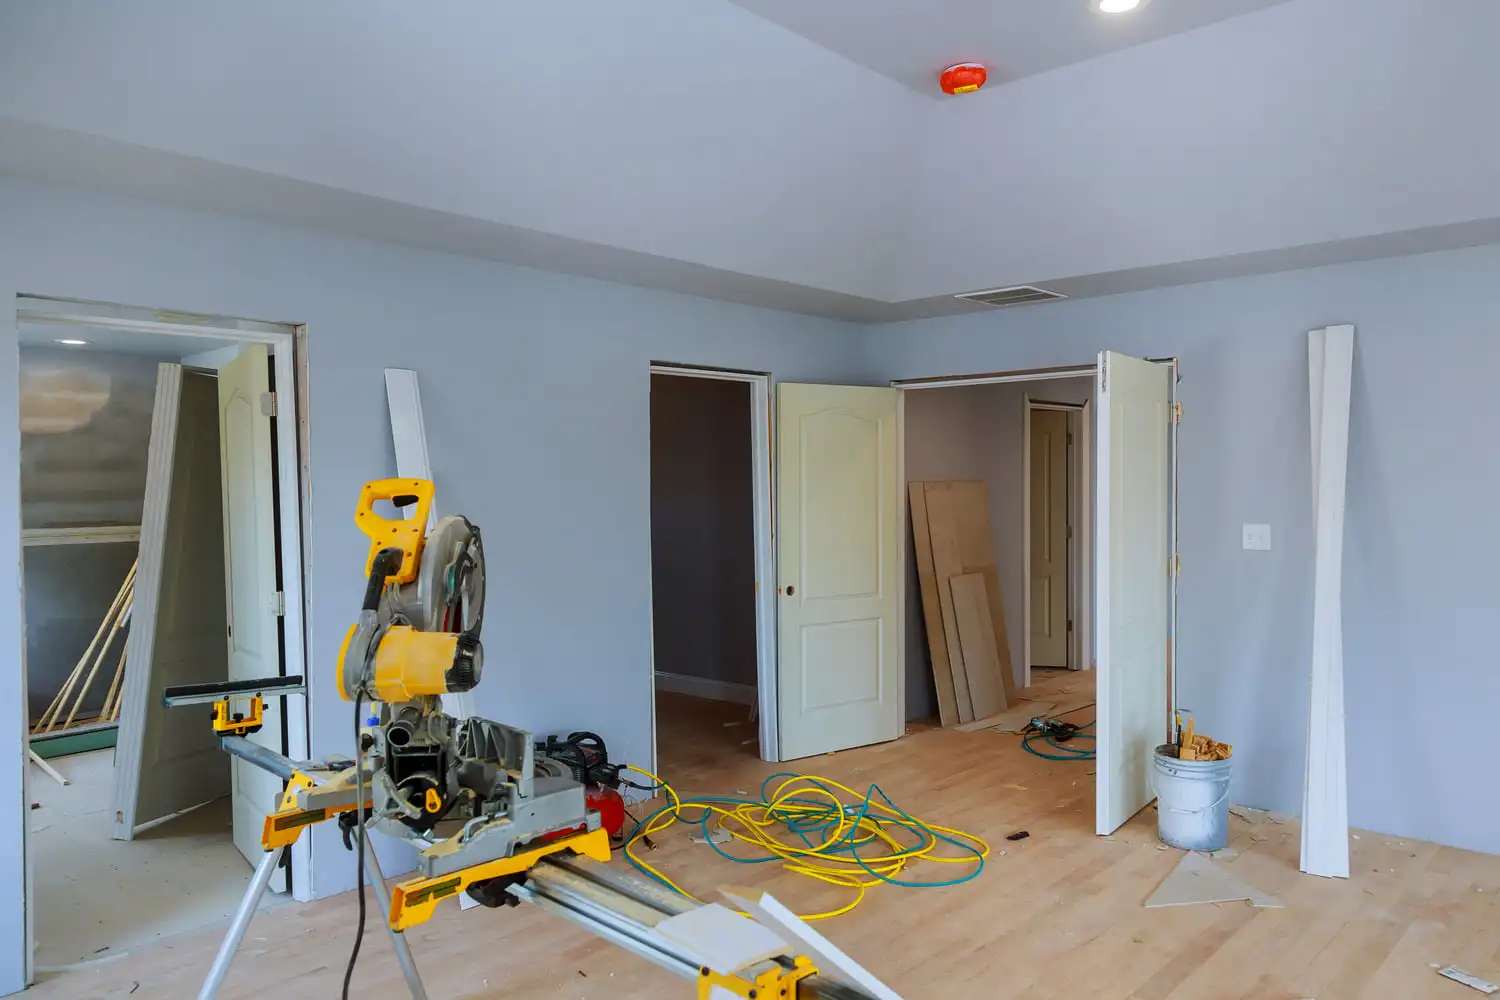 Expert residential renovation services in Dubai by RCi Red Chillies Interiors LLC, showcasing an in-progress home renovation with tools, construction materials, and partially installed fixtures